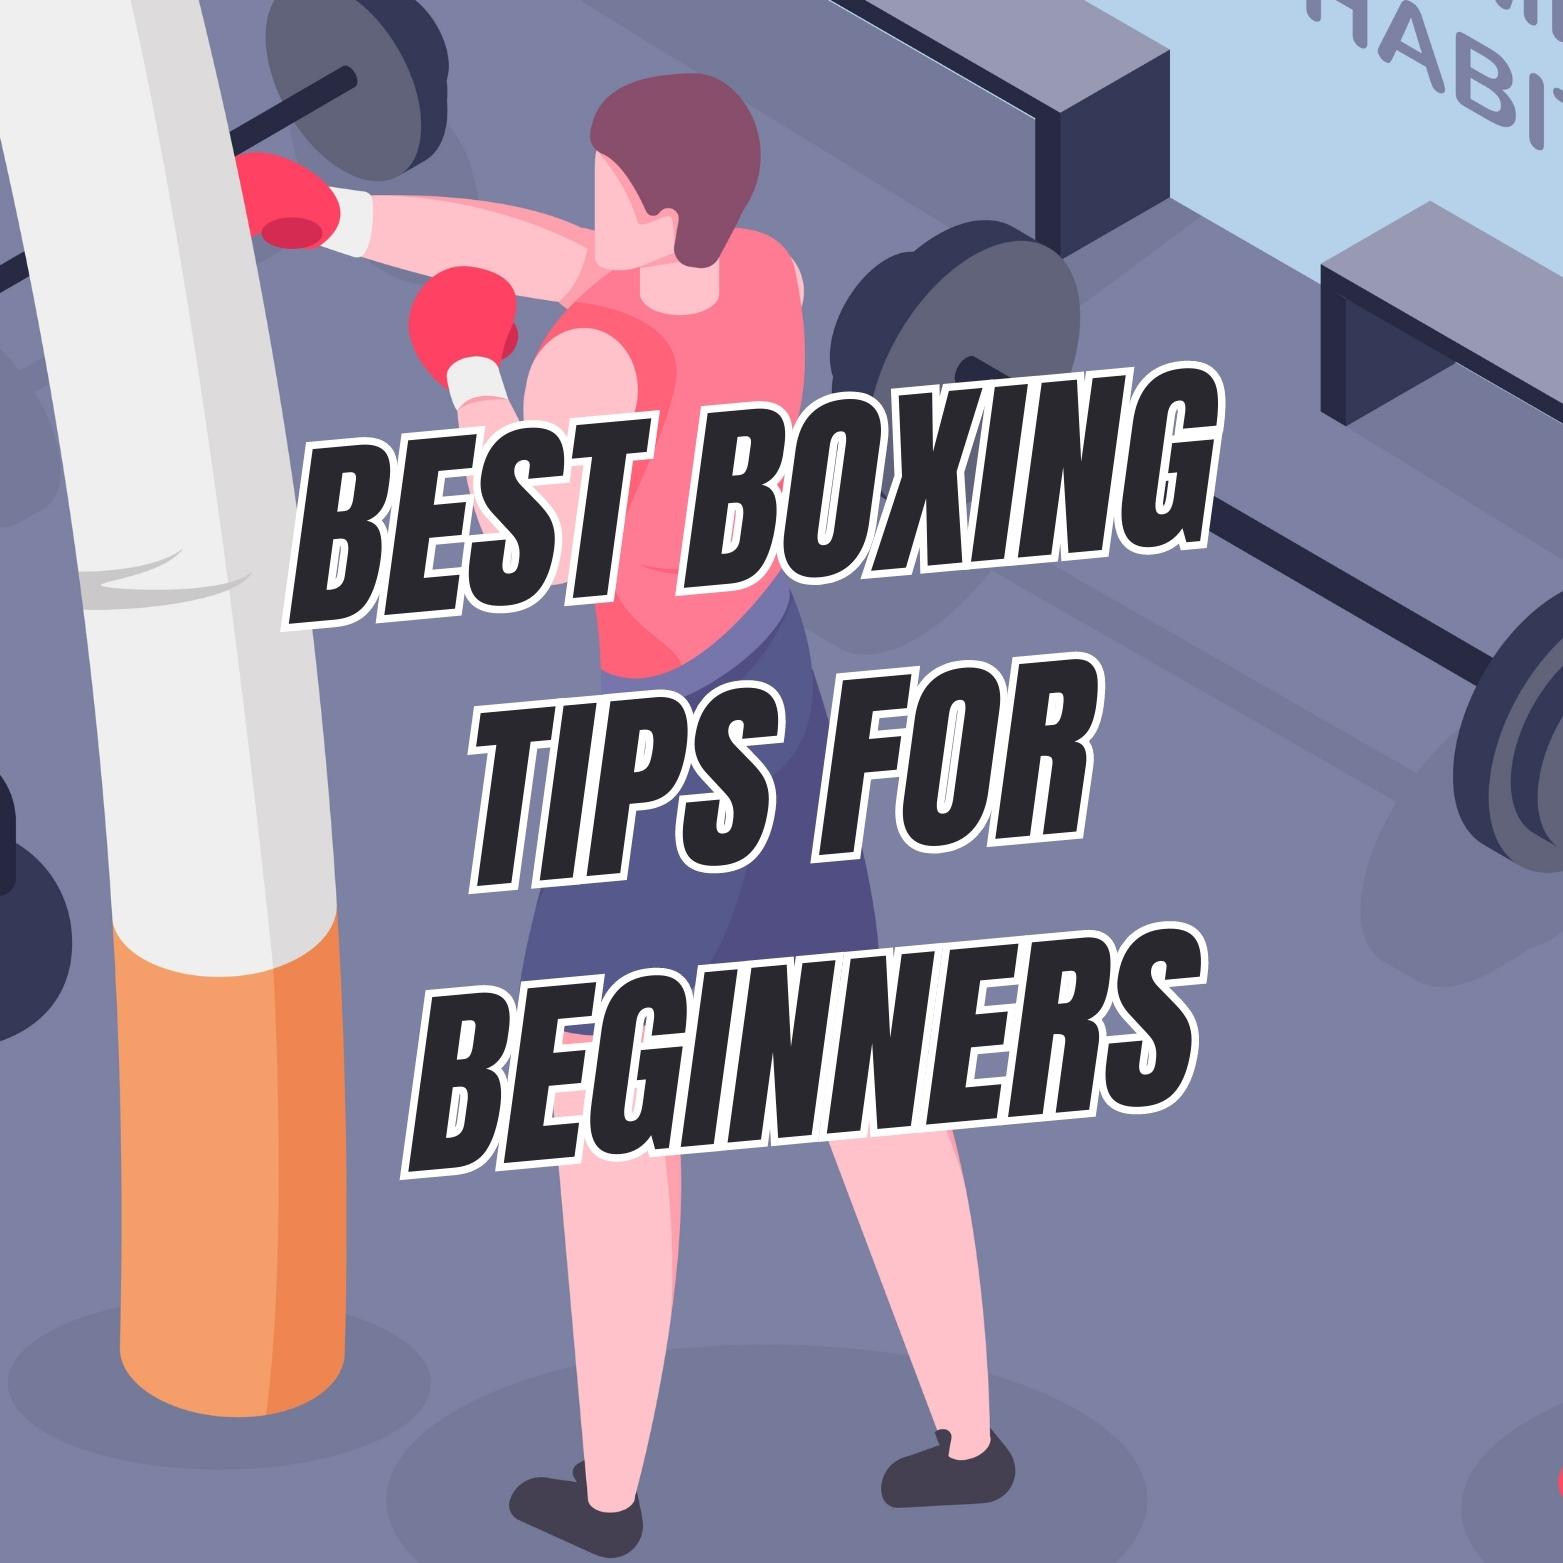 Boxing Tips for Beginners